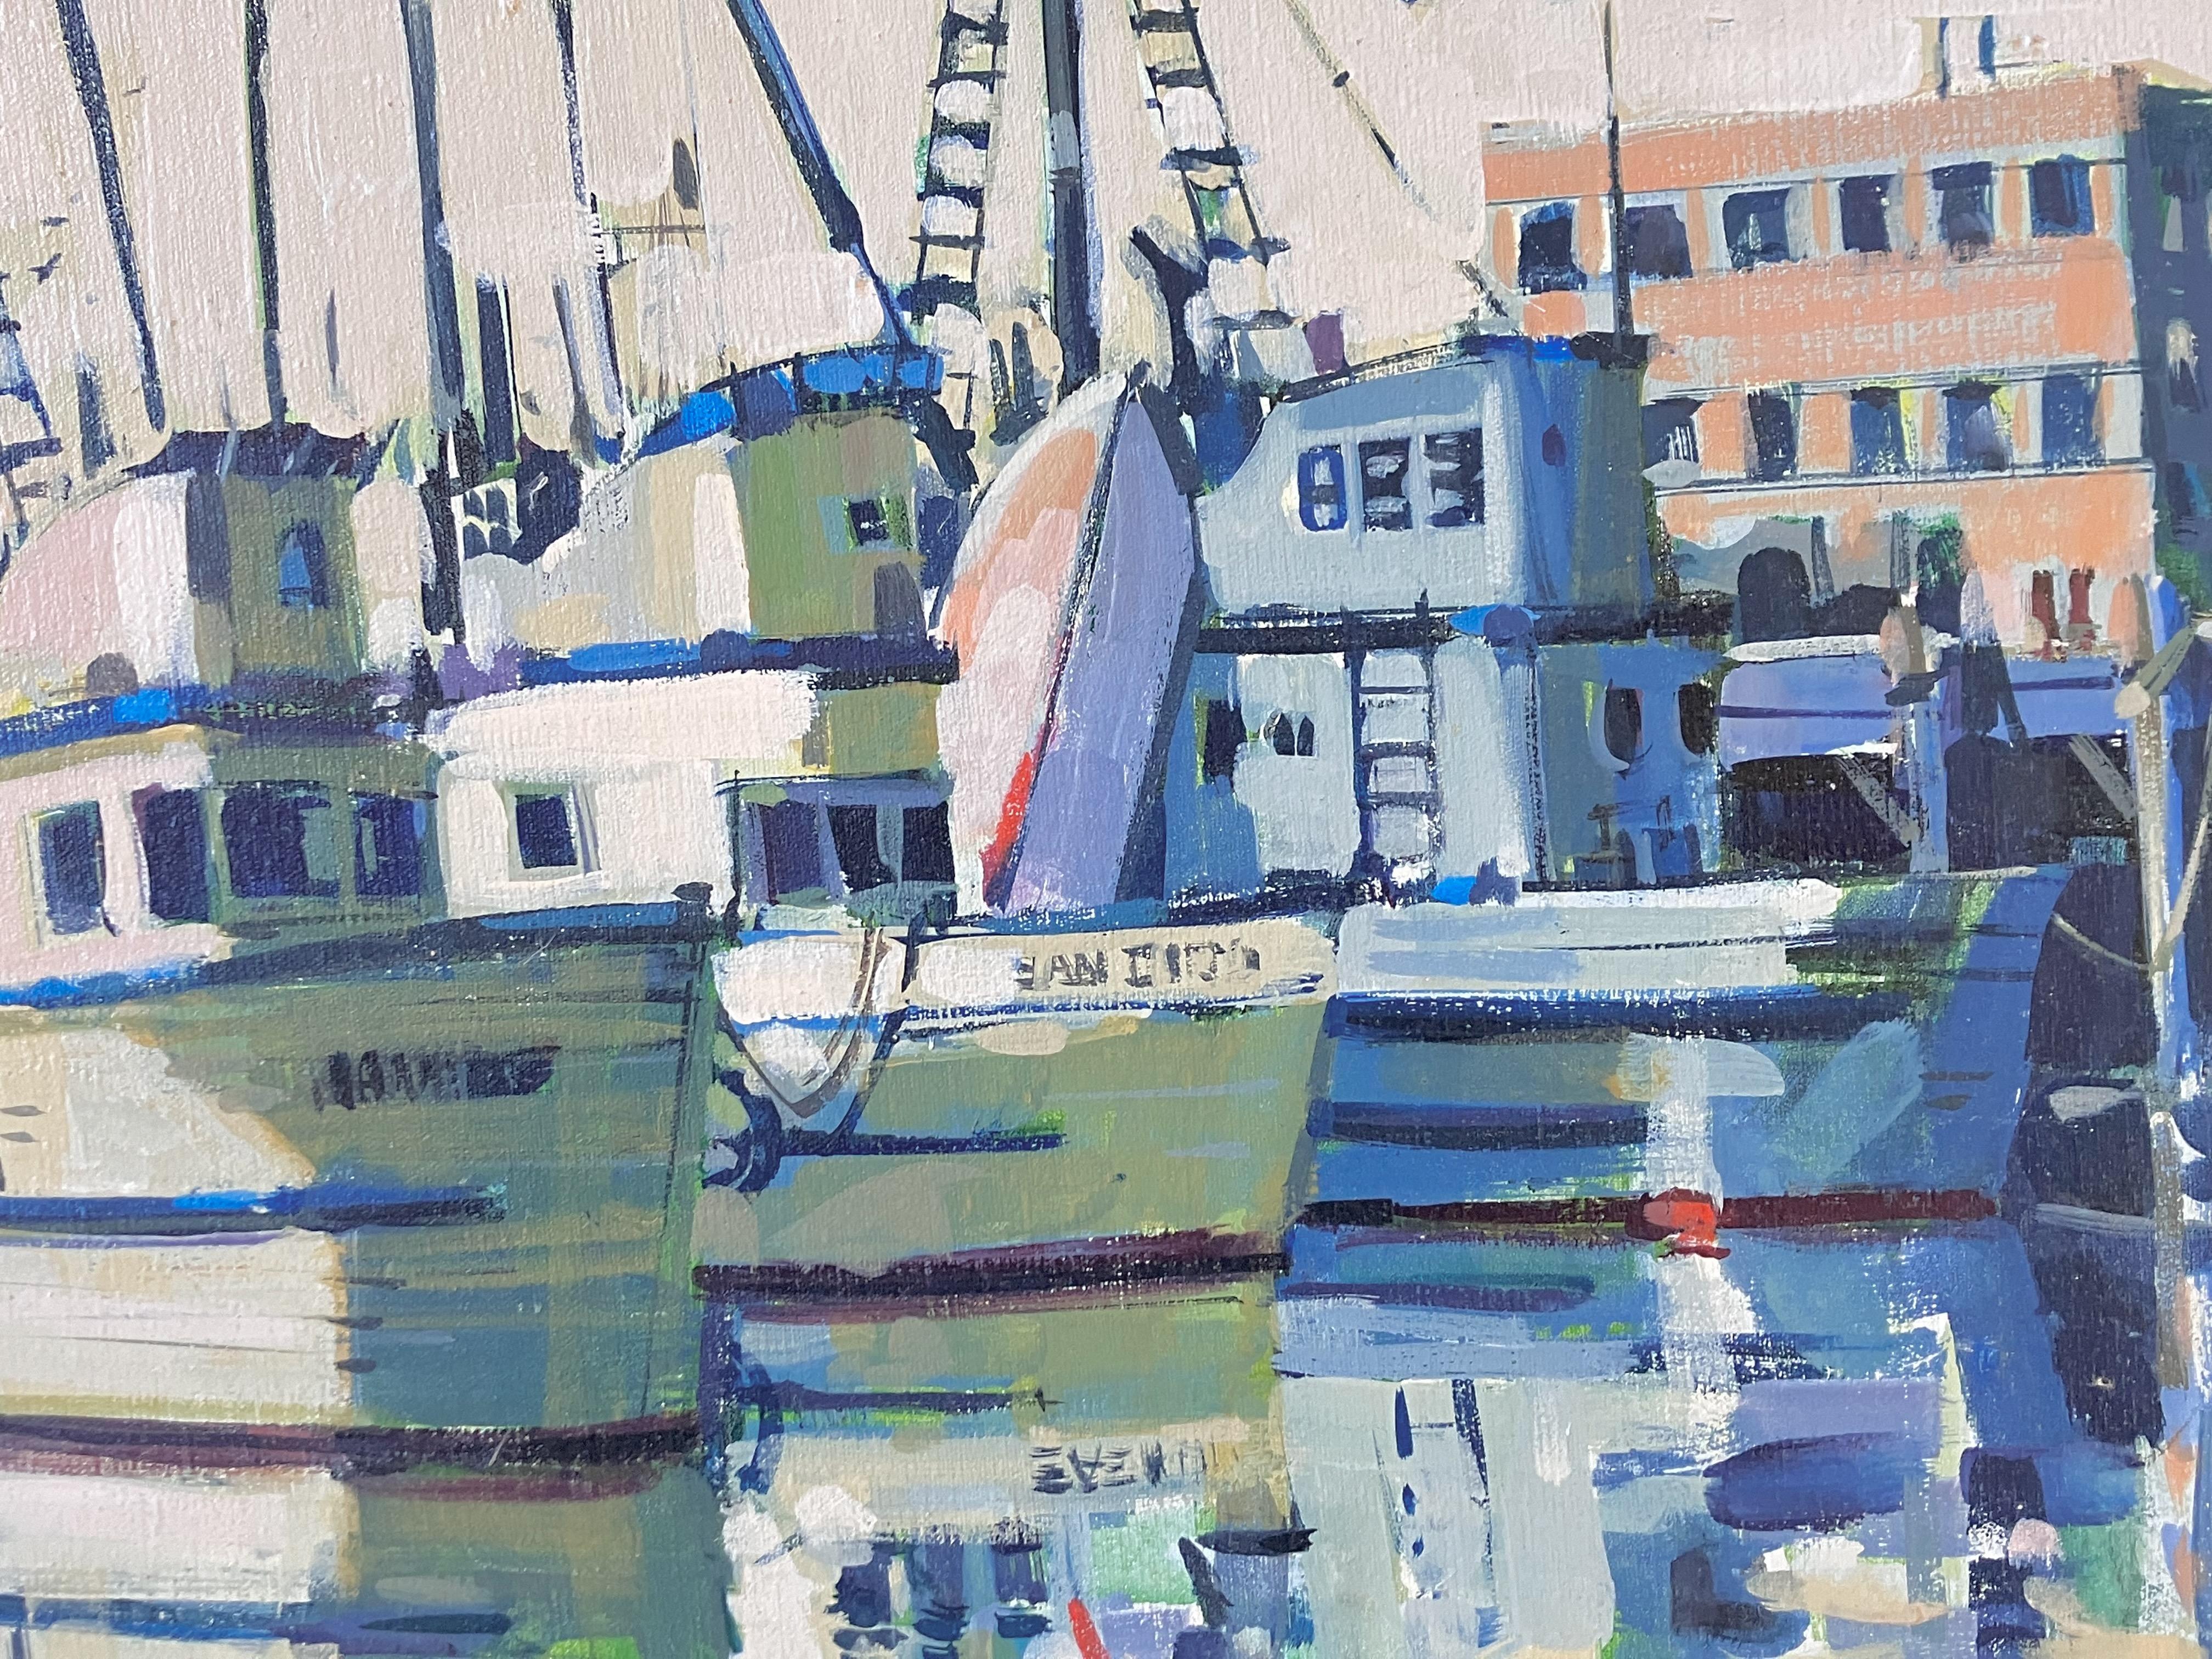 Artist: Glenn Dodenhoff – American (1936- 2012)
Title: Untitled – Boats at Dock
Year: circa 1975
Medium: Oil on canvas
Size: 24 x 30 inches. 
Unframed
Signature: Signed lower right
Condition: Very good. 


This painting by Glenn Dodenhoff